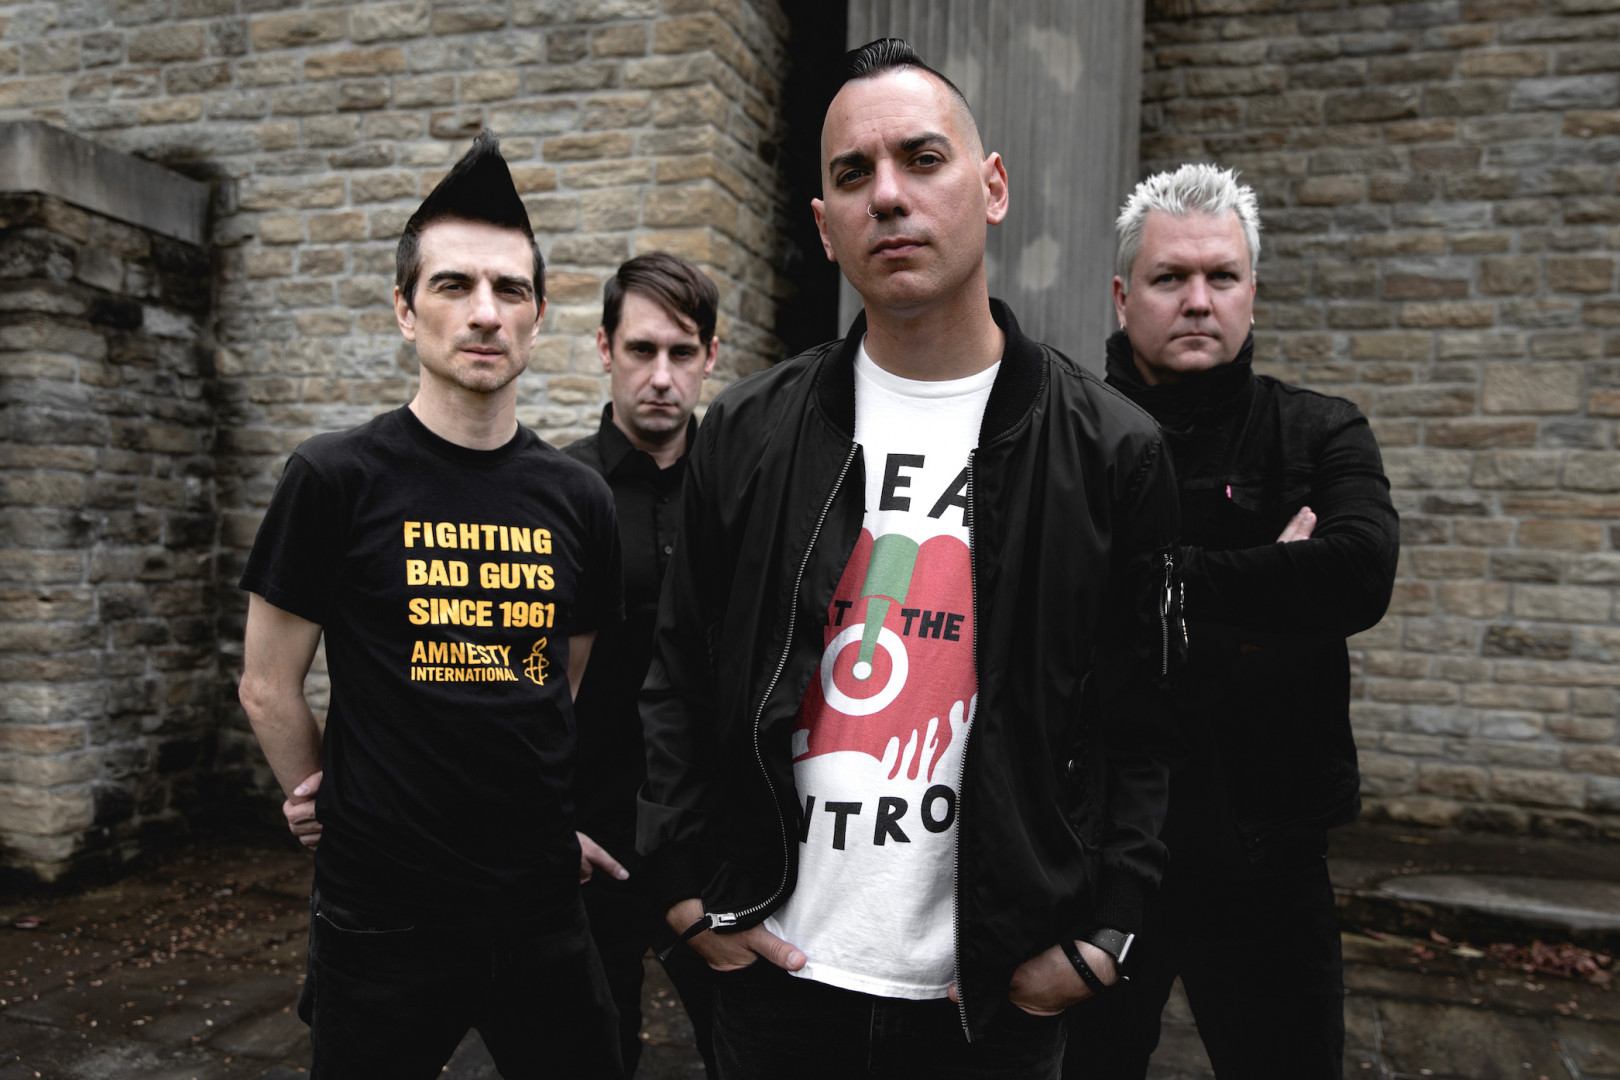 Anti-Flag announce new album, release "LAUGH. CRY. SMILE. DIE. (feat. Shane Told)" video